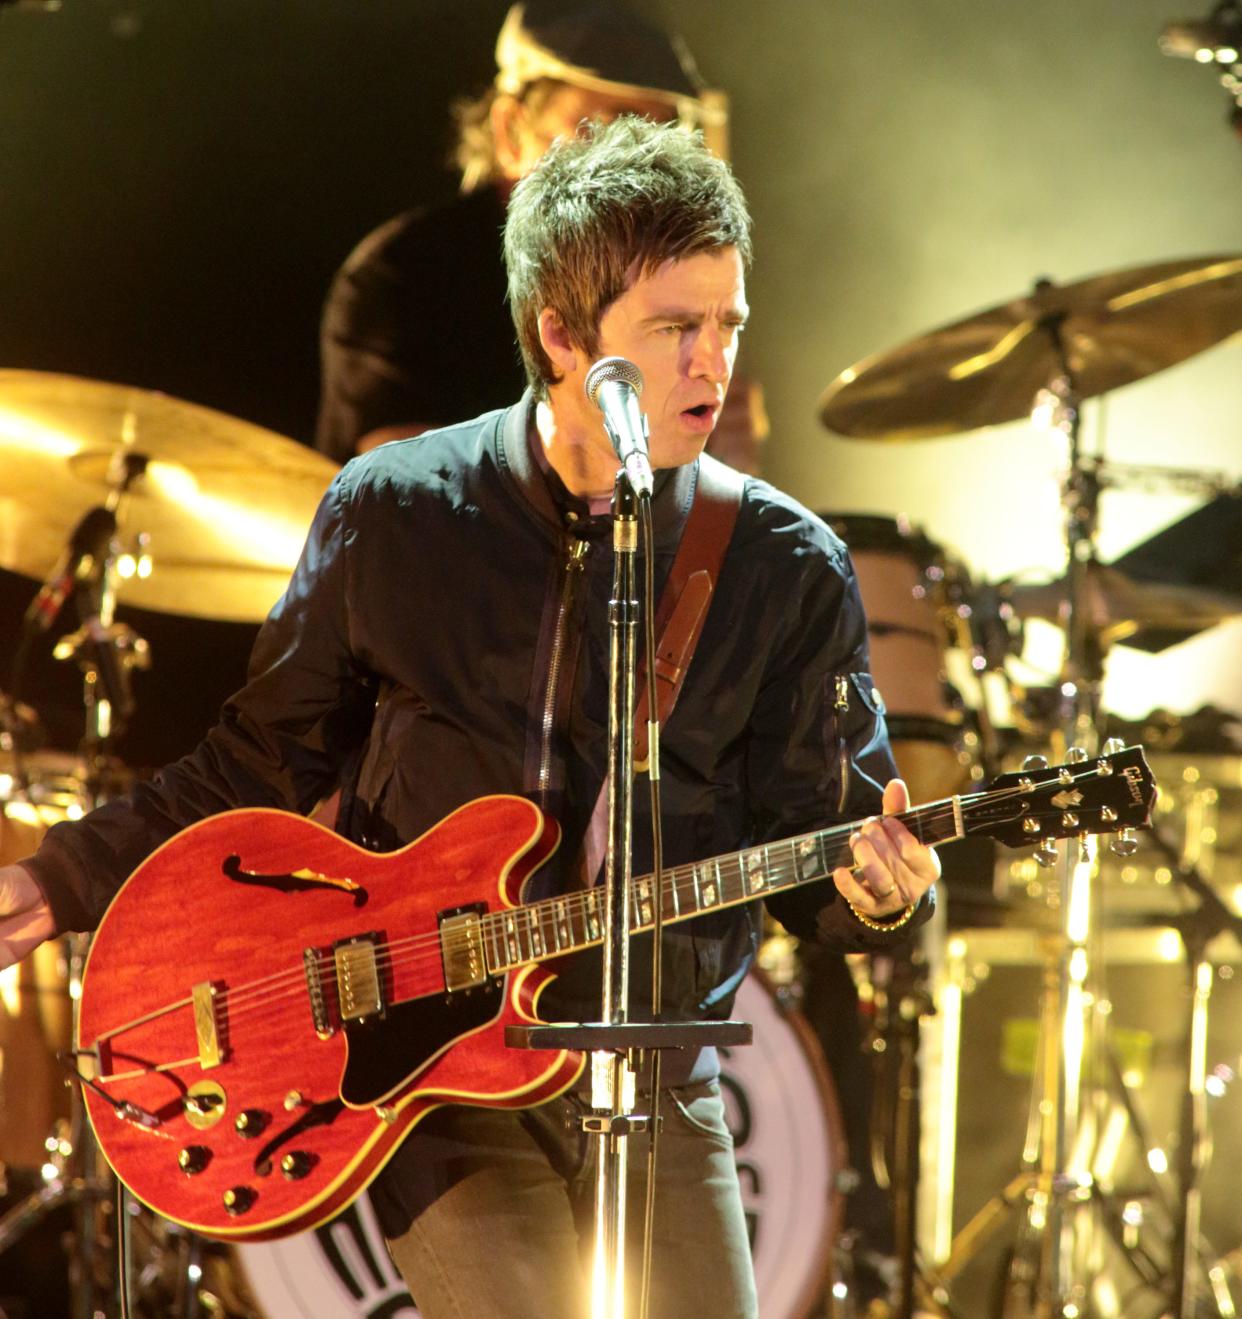 Singer-songwriter Noel Gallagher, formerly of the band Oasis, brings his High Flying Birds to Riverbend Music Center this summer on a co-headline tour with Garbage. Tickets go on sale Friday.